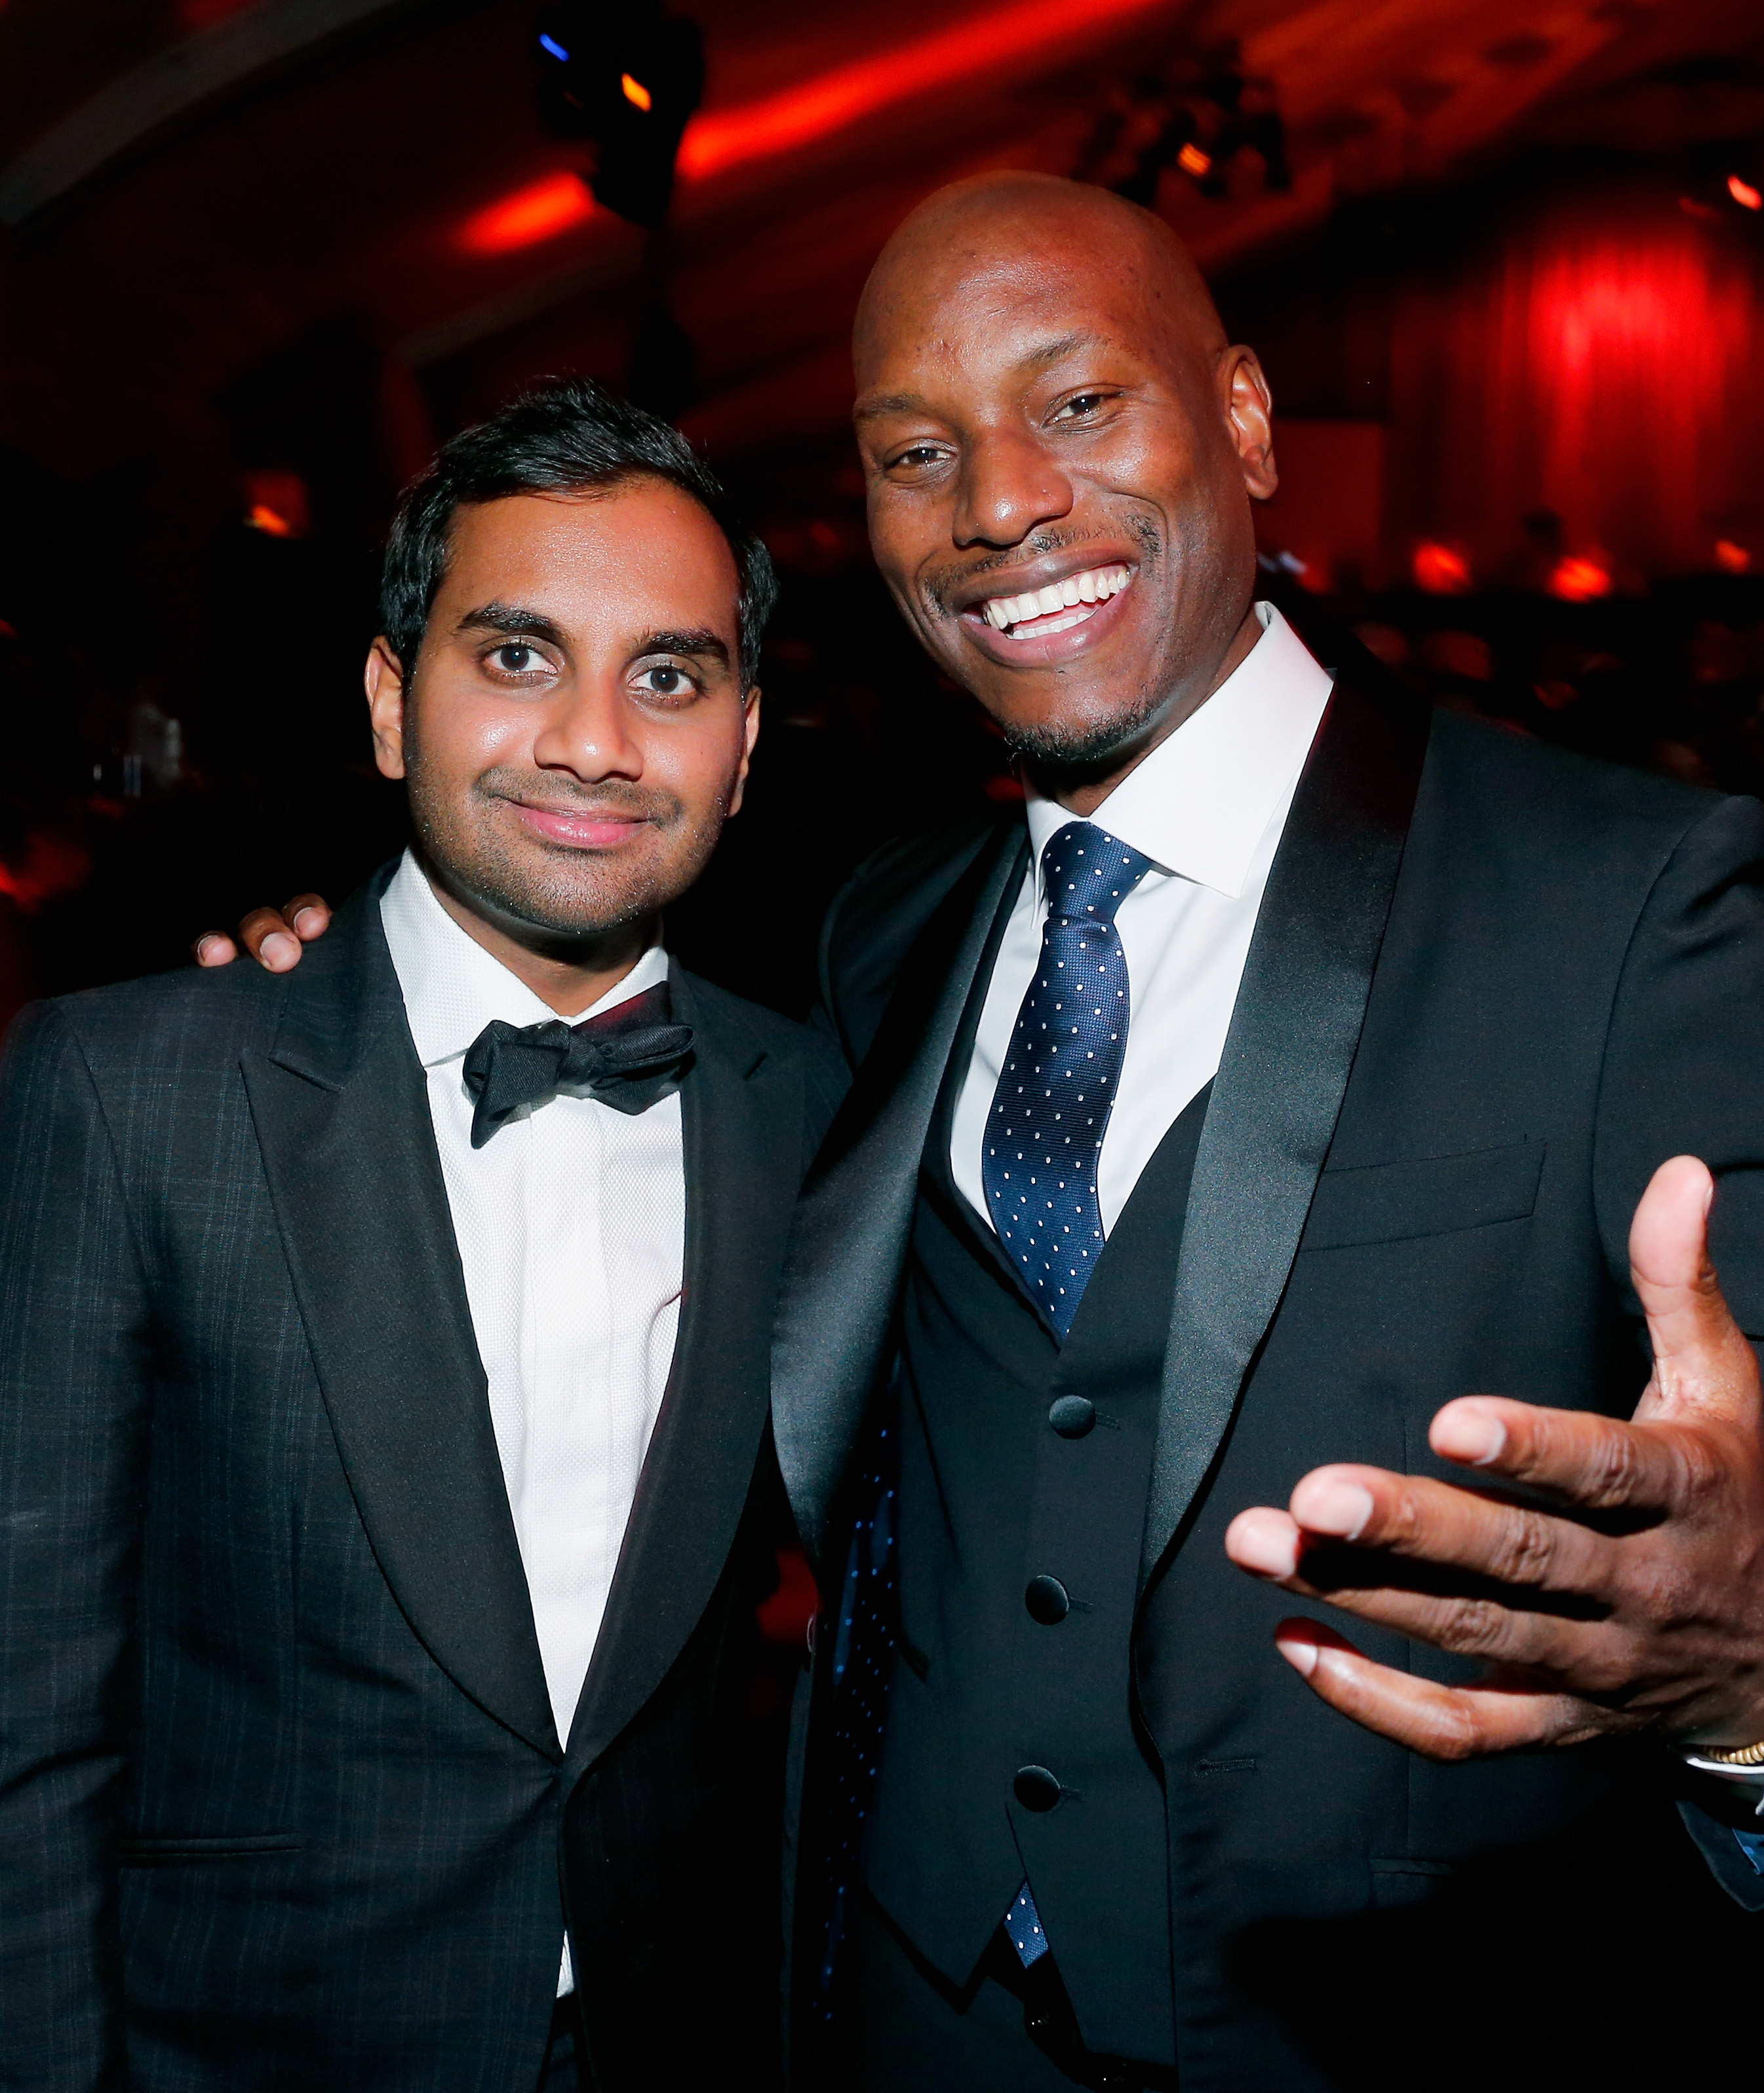 Comedian Aziz Ansari and actor Tyrese Gibson attend The Weinstein Company and Netflix Golden Globe Party on January 10, 2016 in Beverly Hills, California. (Rich Polk&mdash;Getty Images)